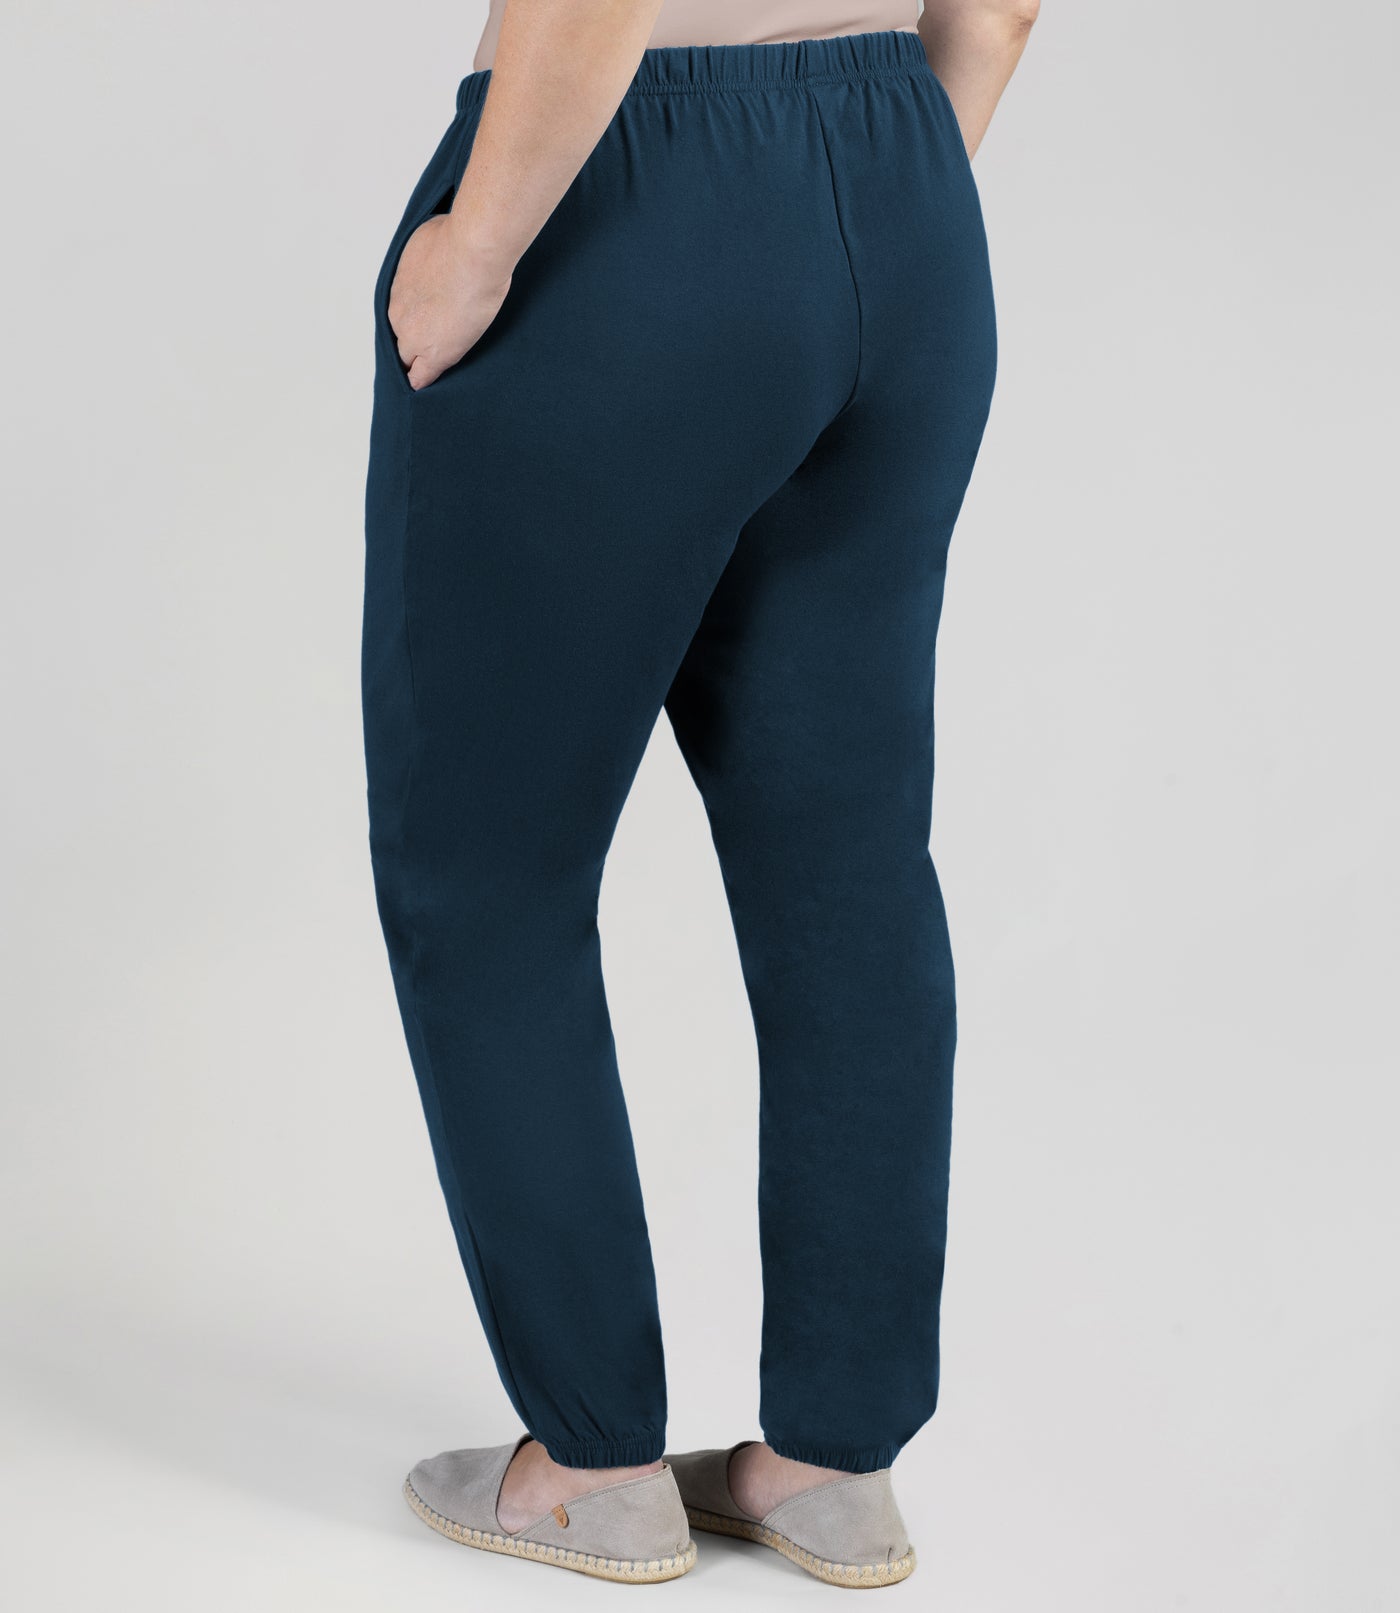 Plus size woman facing back is wearing JunoActive Stretch Naturals plus size jogger pant bottom. Her left hand is in pocket and right arm hanging by side. The pant is shirred at top with elastic band and loosely fitted. The hem at bottom is gathered with elastic at ankle. Color is indigo.